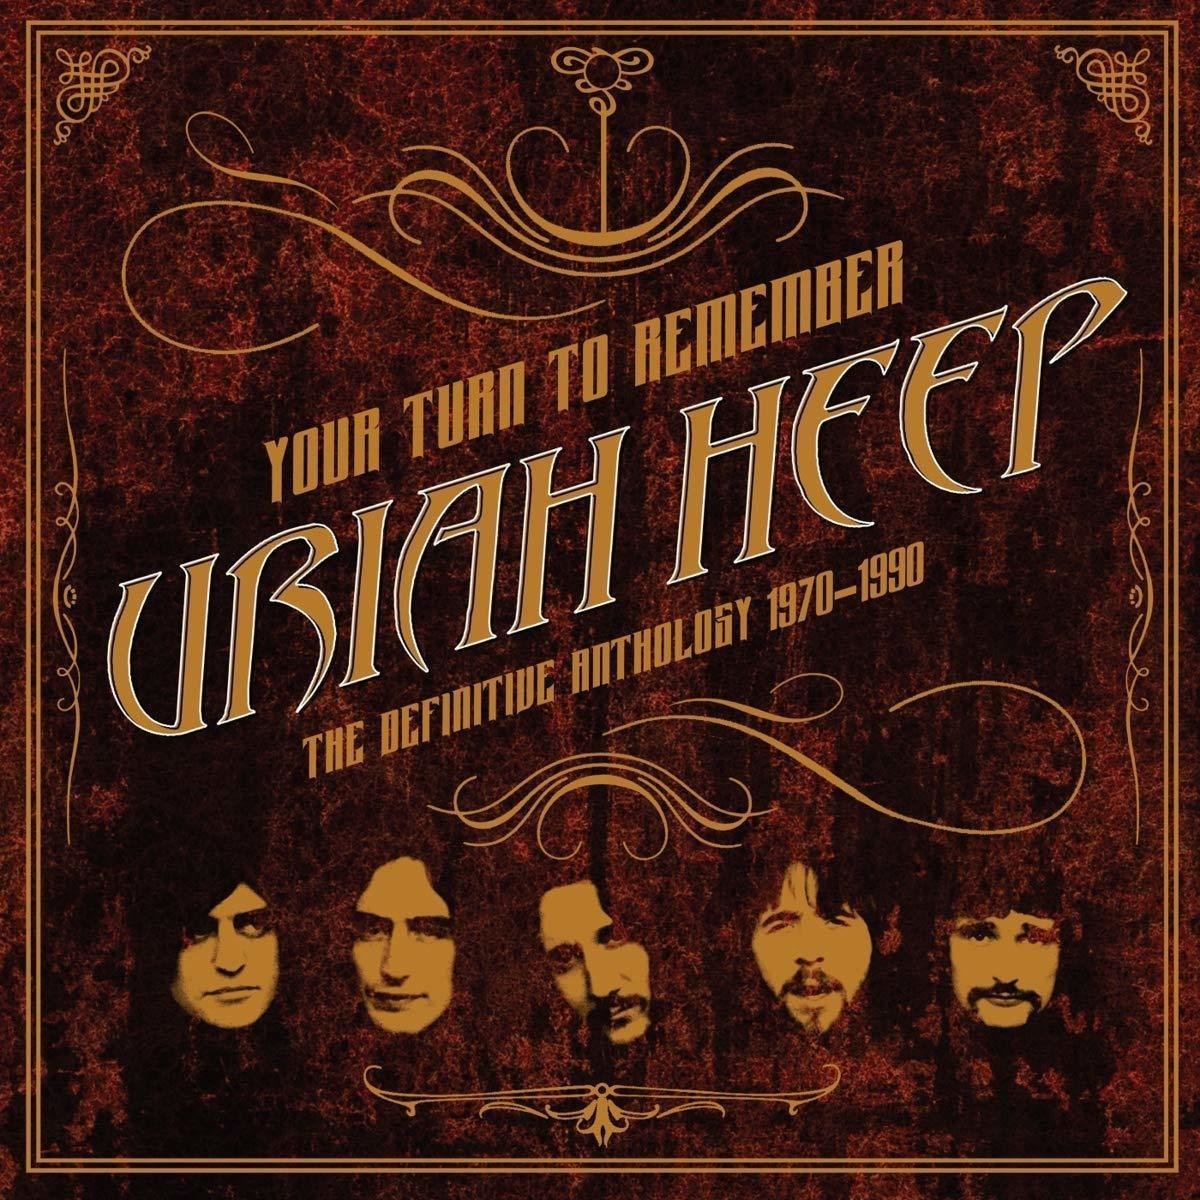 Vinyylilevy Uriah Heep - Your Turn To Remember: The Definitive Anthology 1970-1990 (LP)